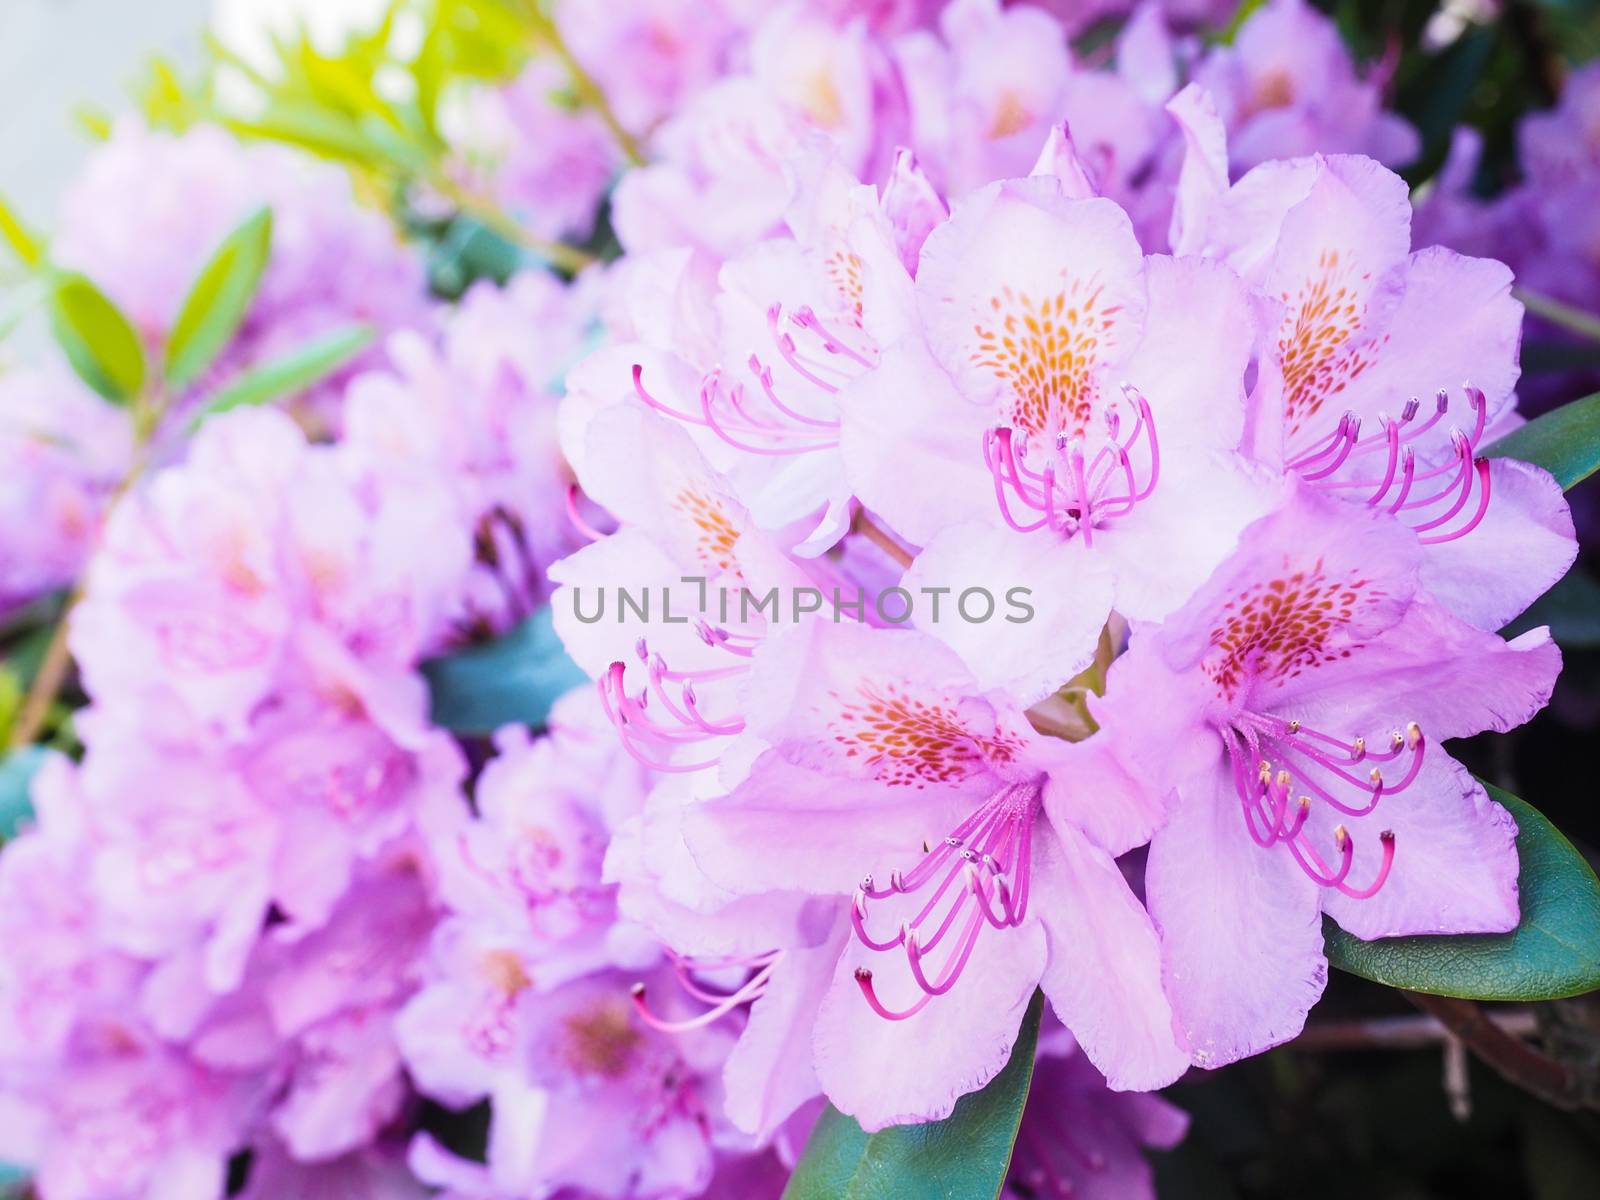 Rhododendron flower, magenta color, at closeup by Arvebettum